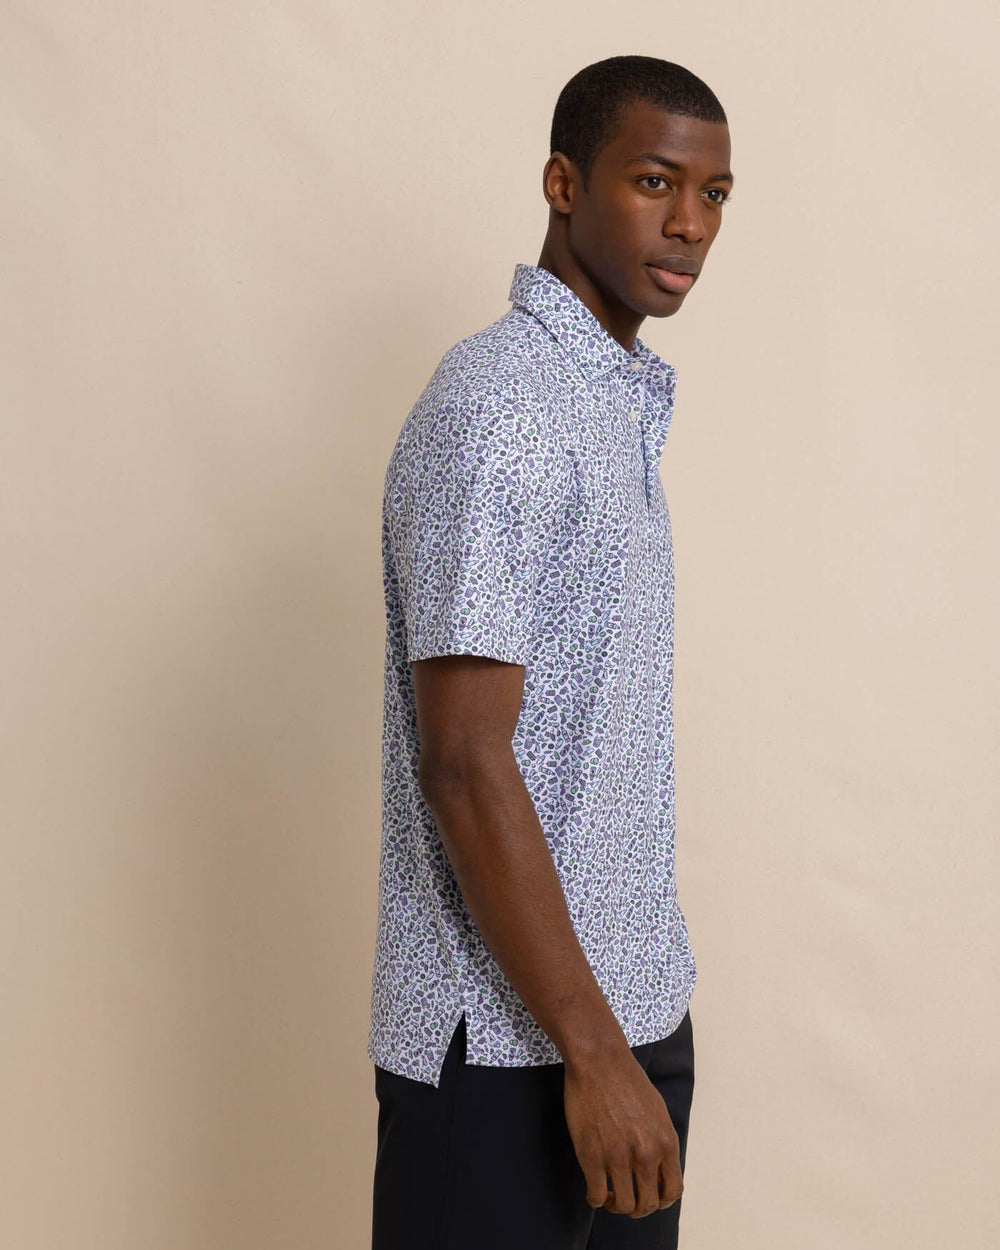 The front view of the Southern Tide Driver Dazed and Transfused Printed Polo by Southern Tide - Classic White